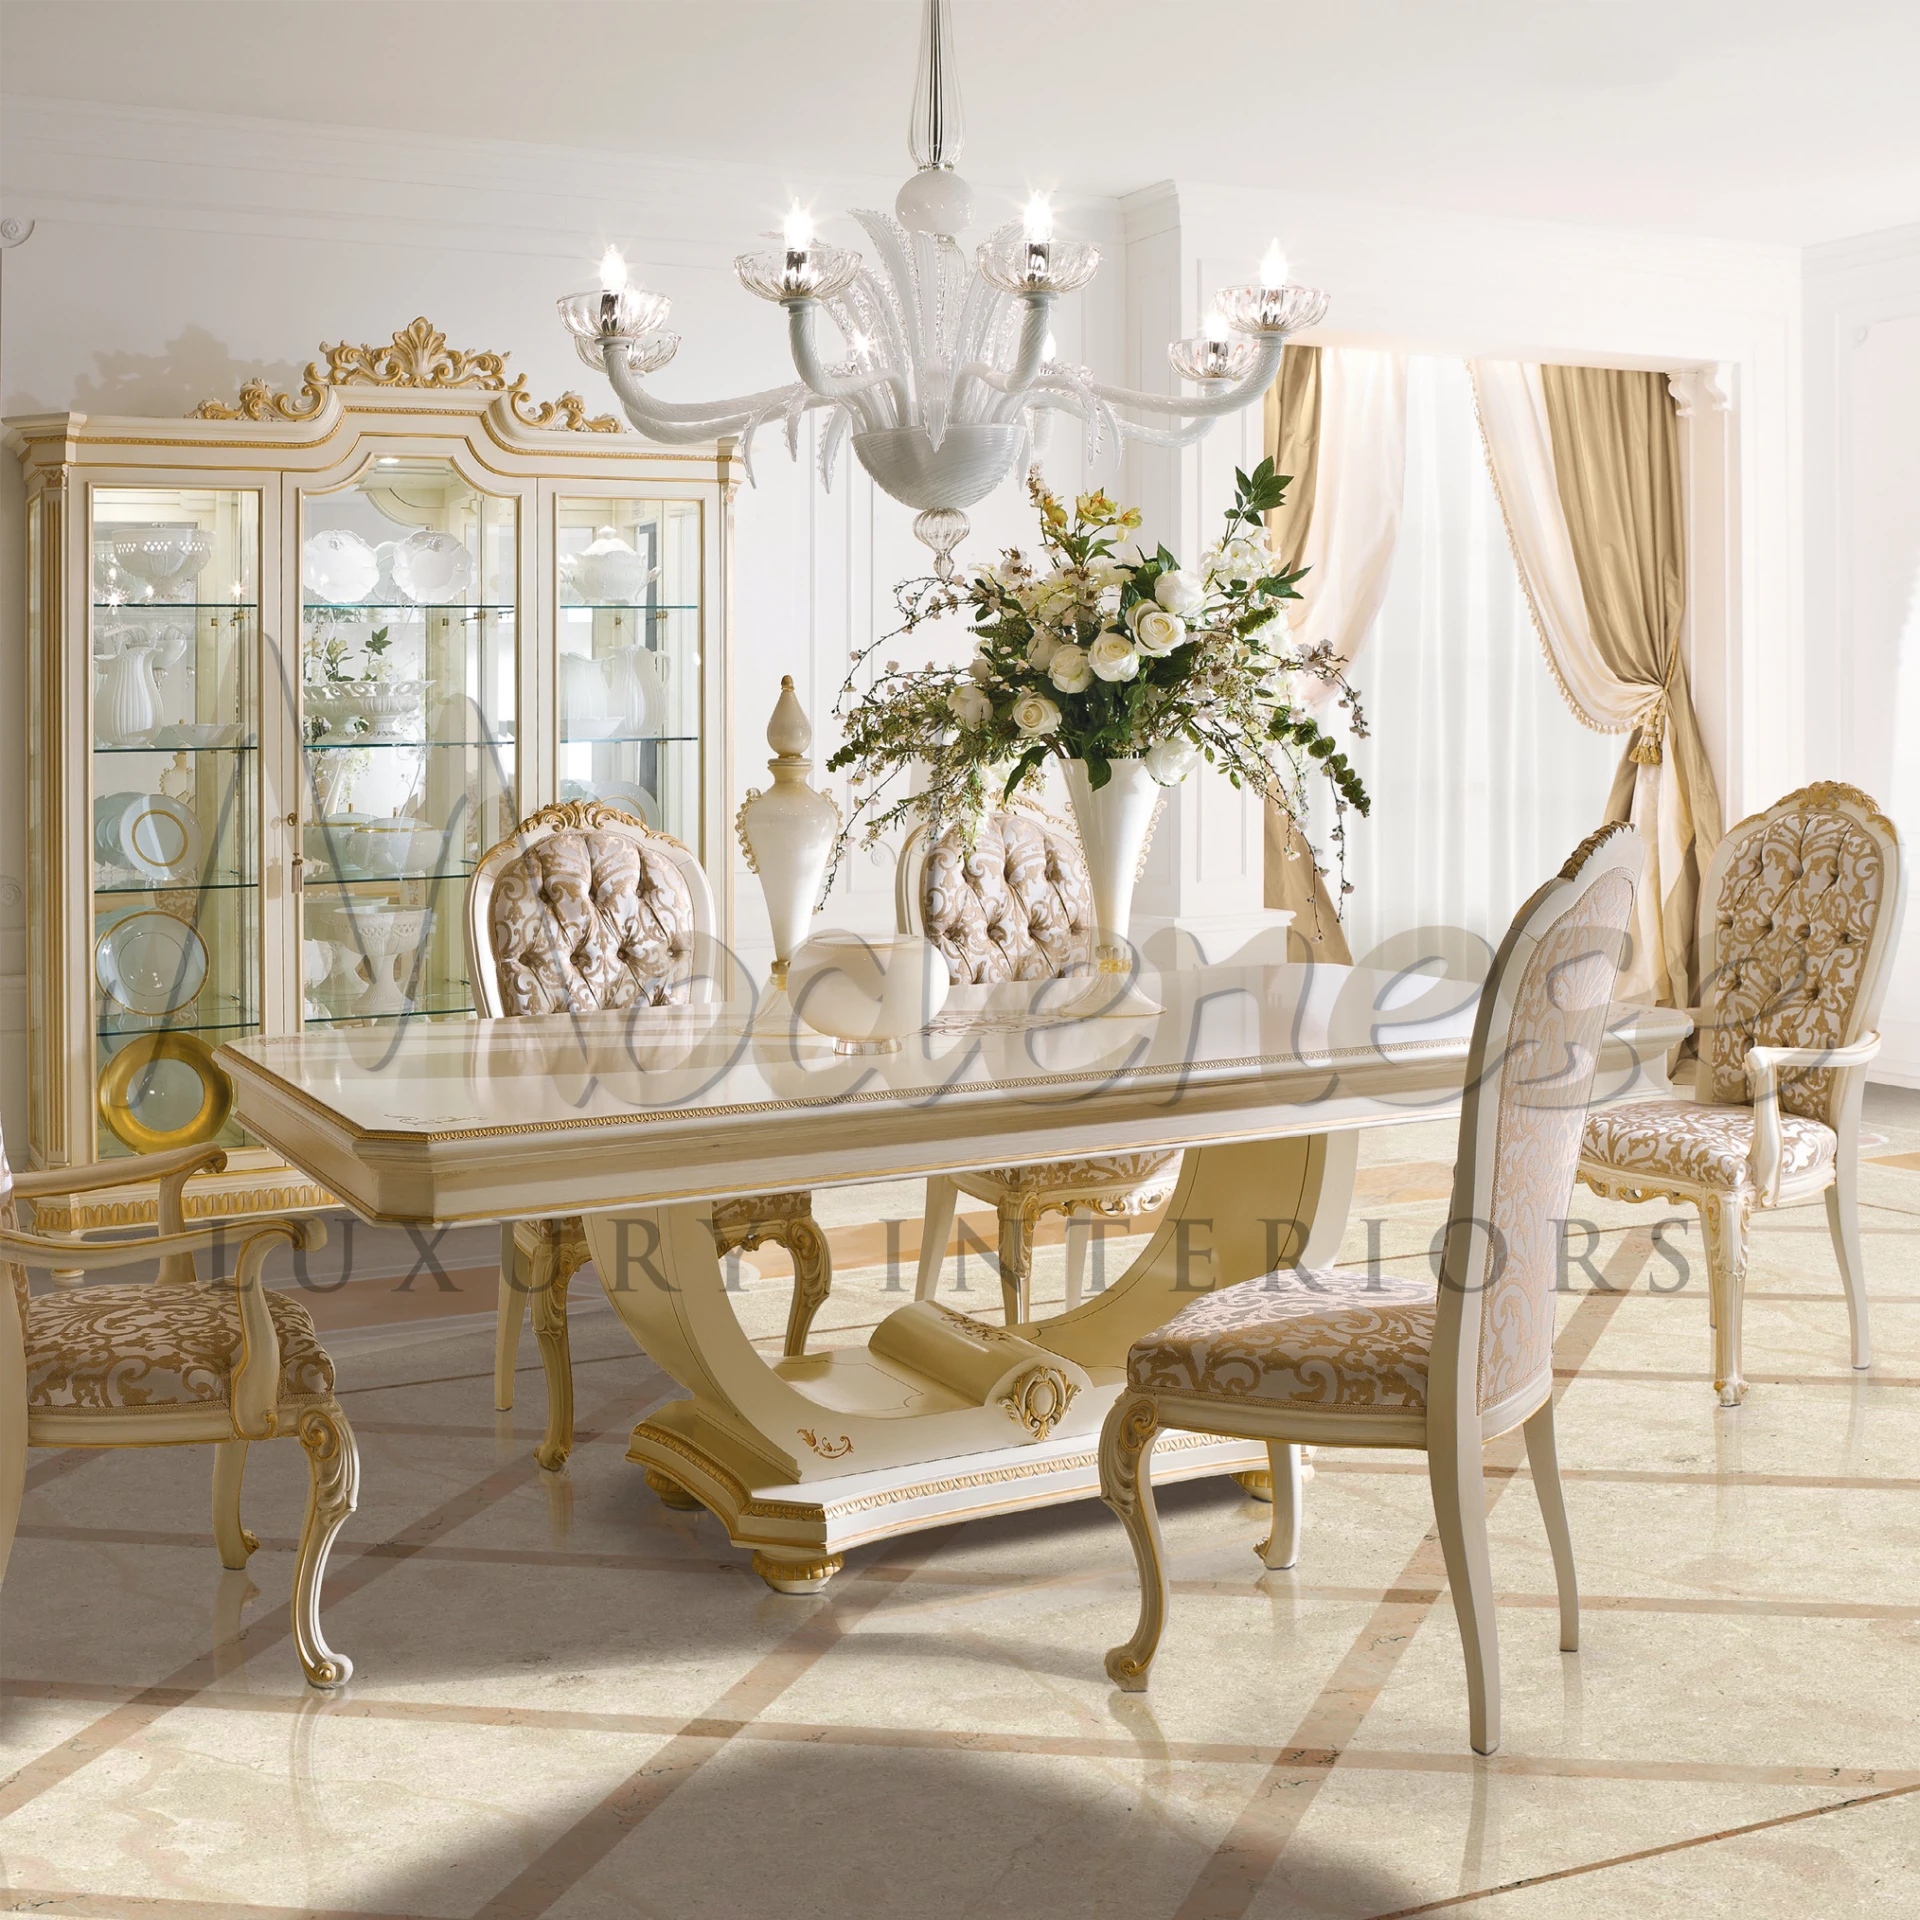 Modenese Interiors' Elegant Cream Curtains, epitomizing luxury with their sophisticated texture and timeless appeal.